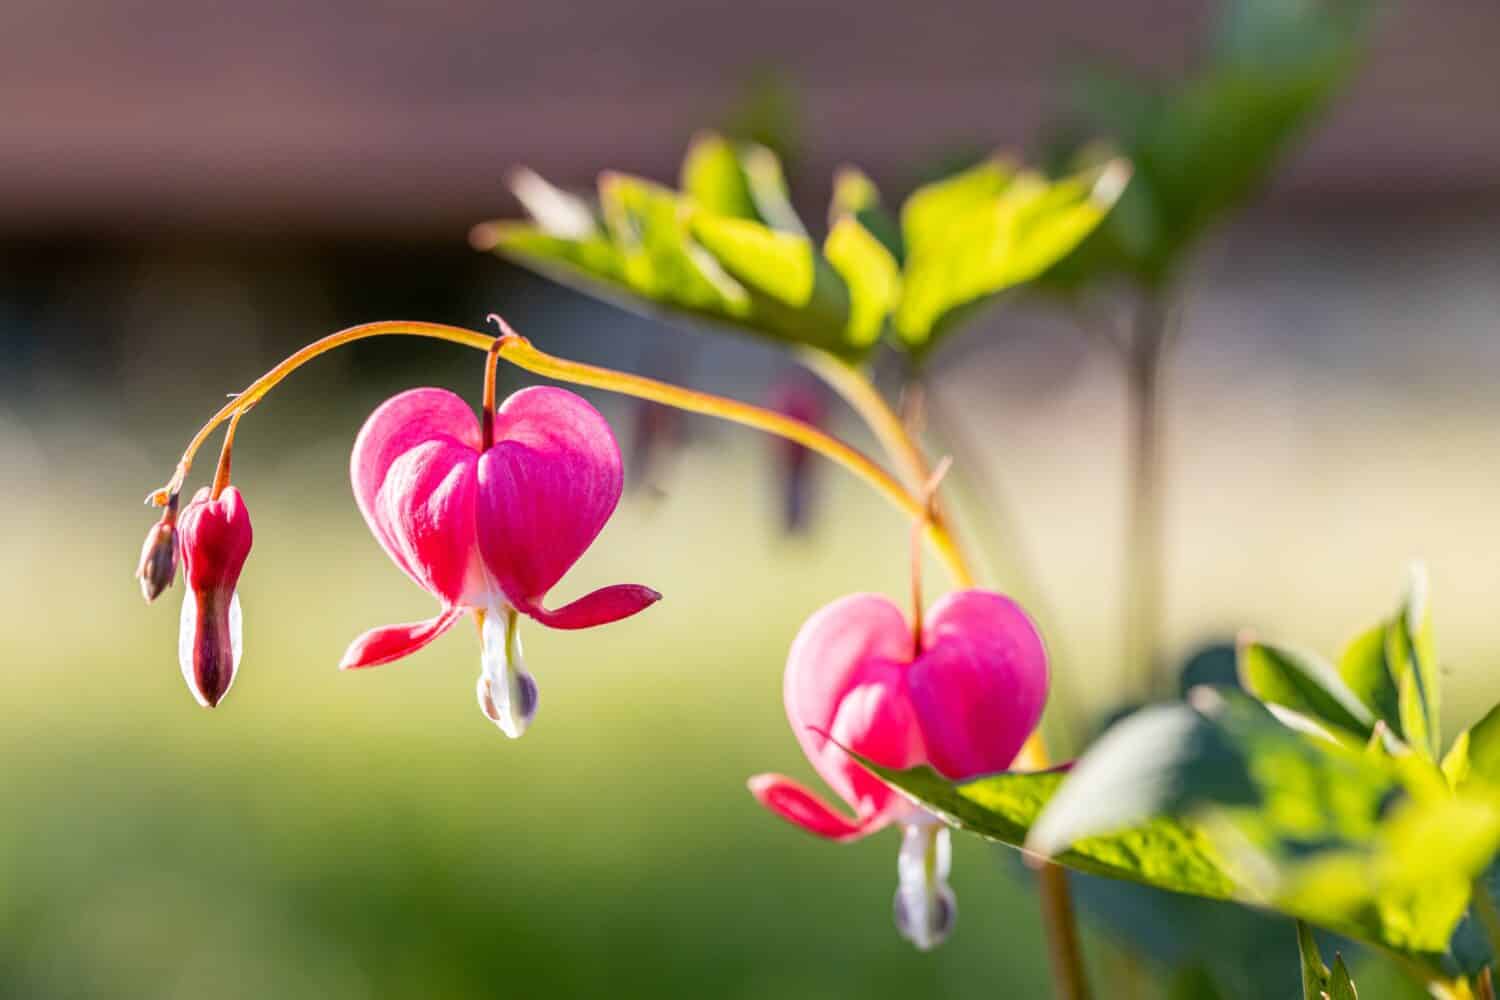 Dicentra spectabilis bleeding heart flowers in hearts shapes in bloom, beautiful Lamprocapnos pink white flowering plant, green leaves on branches, springtime ornamental garden